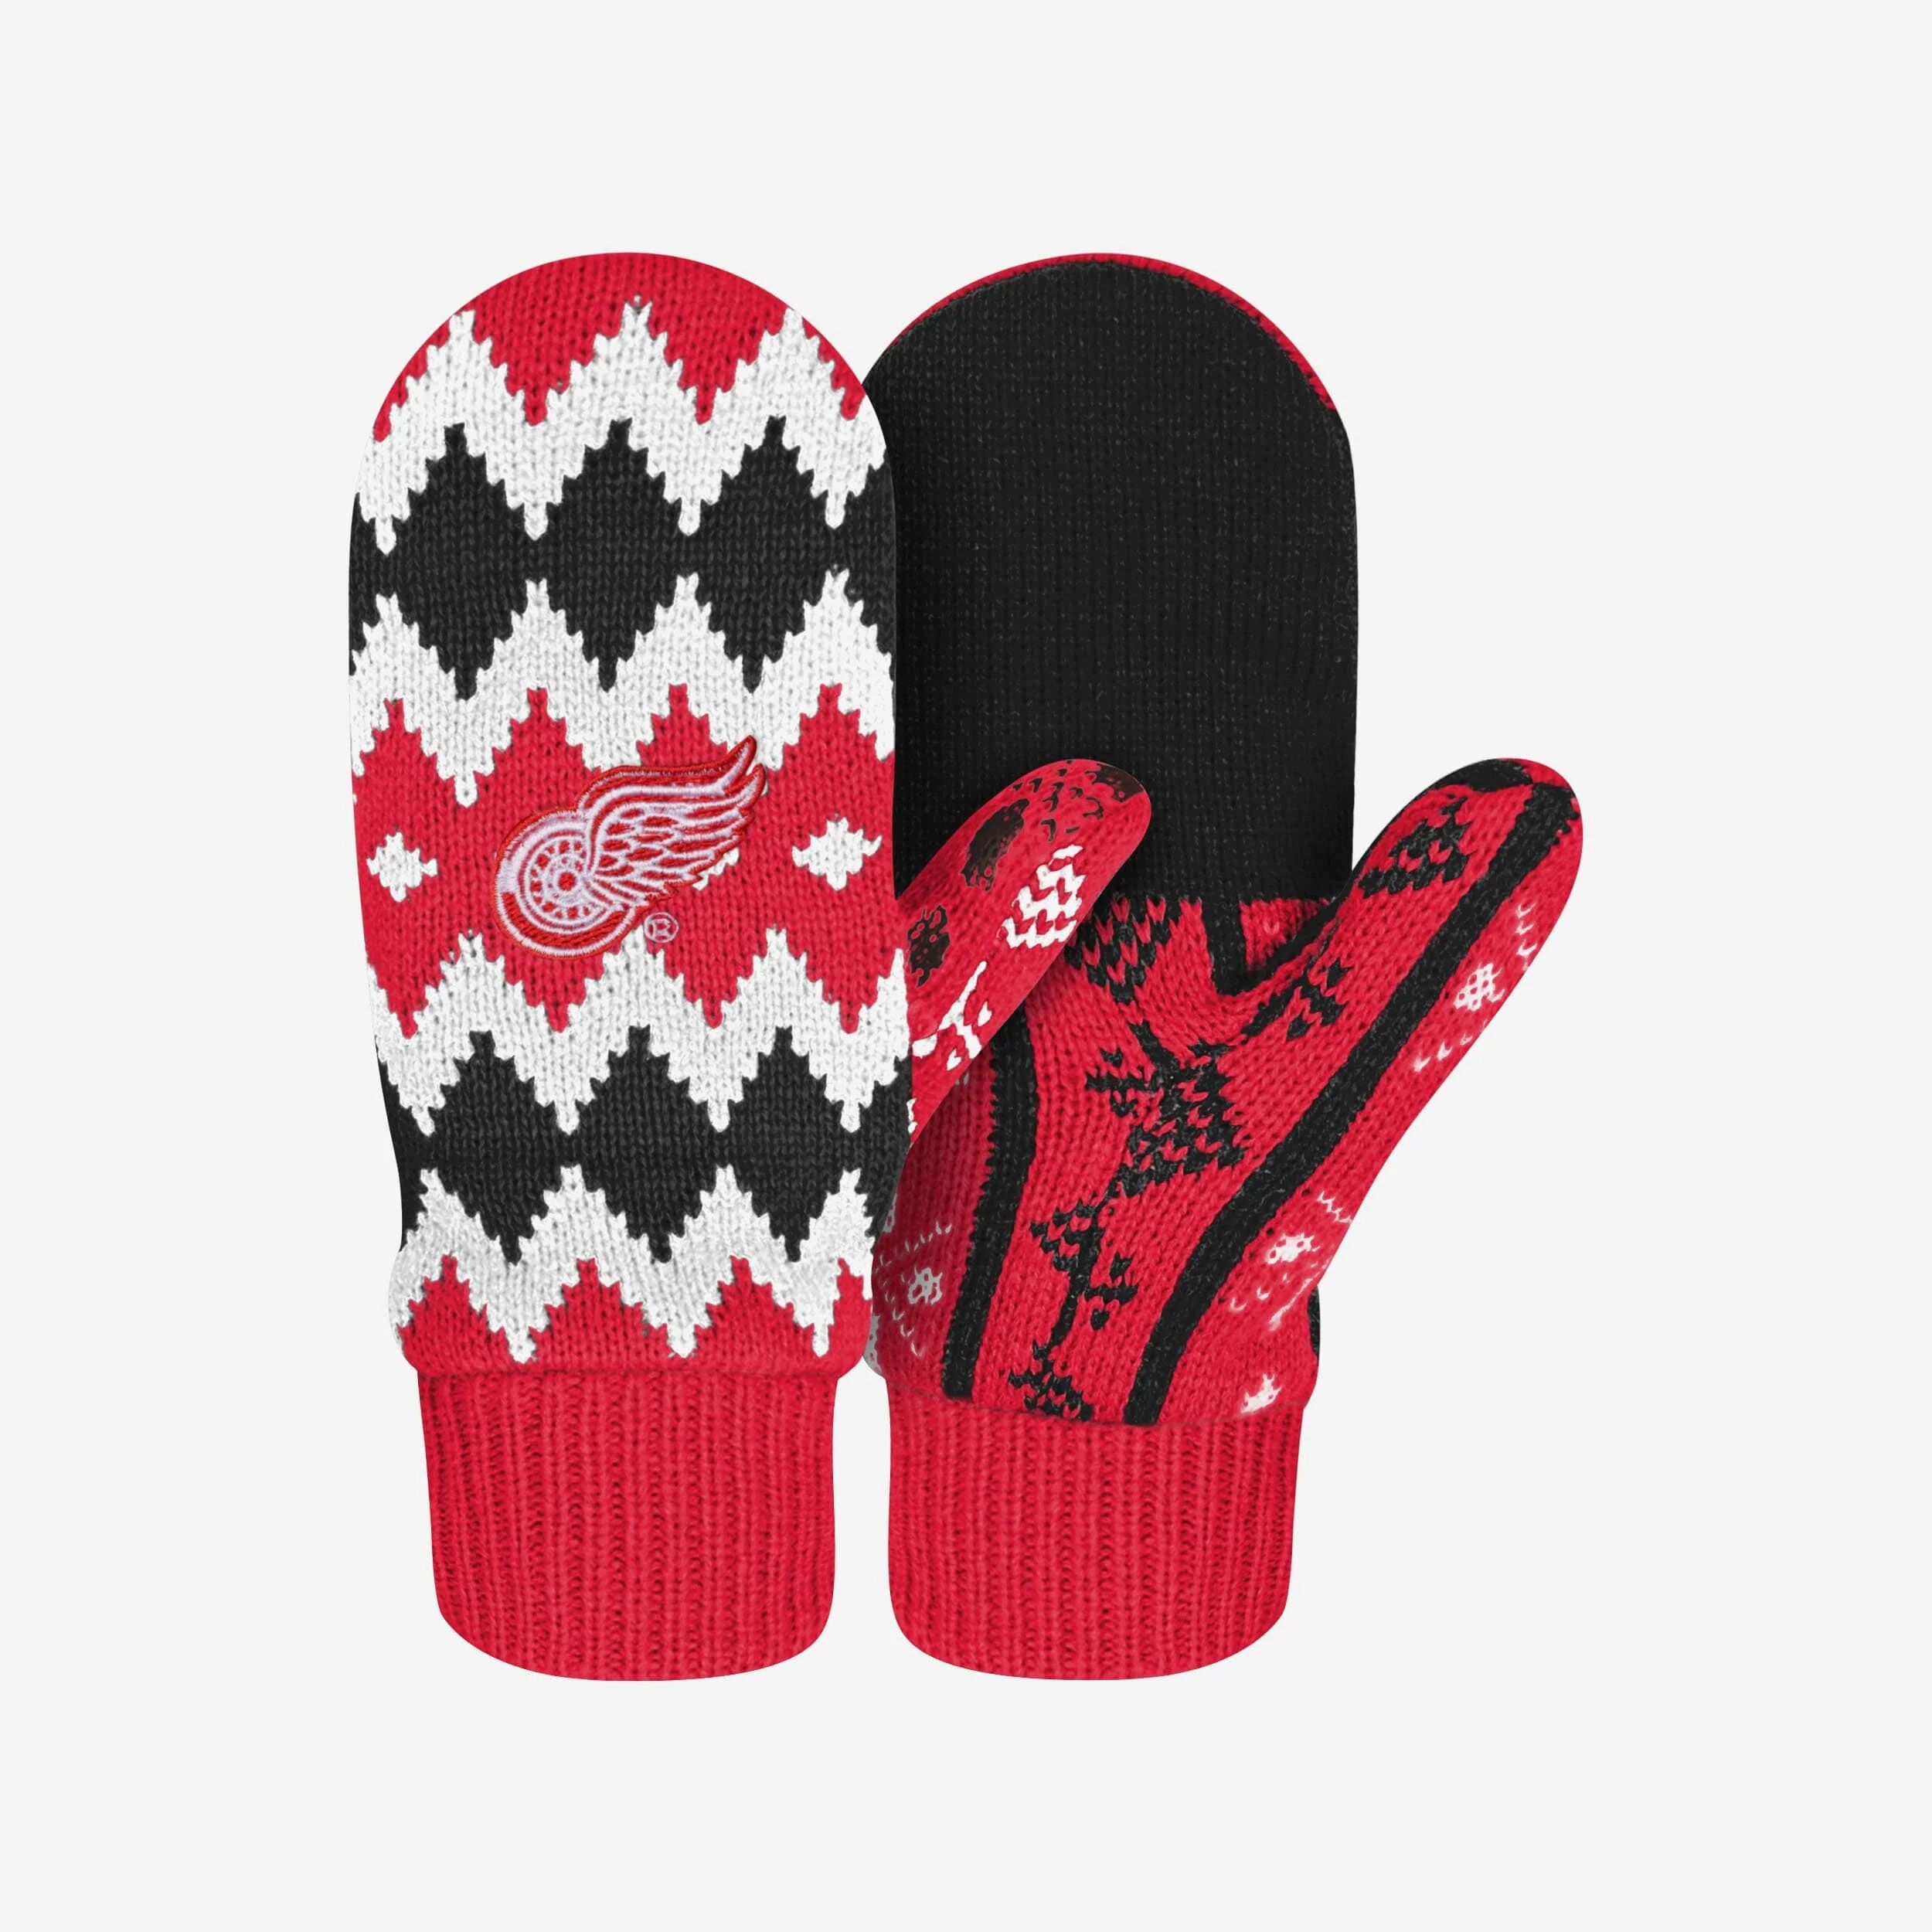 FOCO Detroit Red Wings Mittens - Unisex